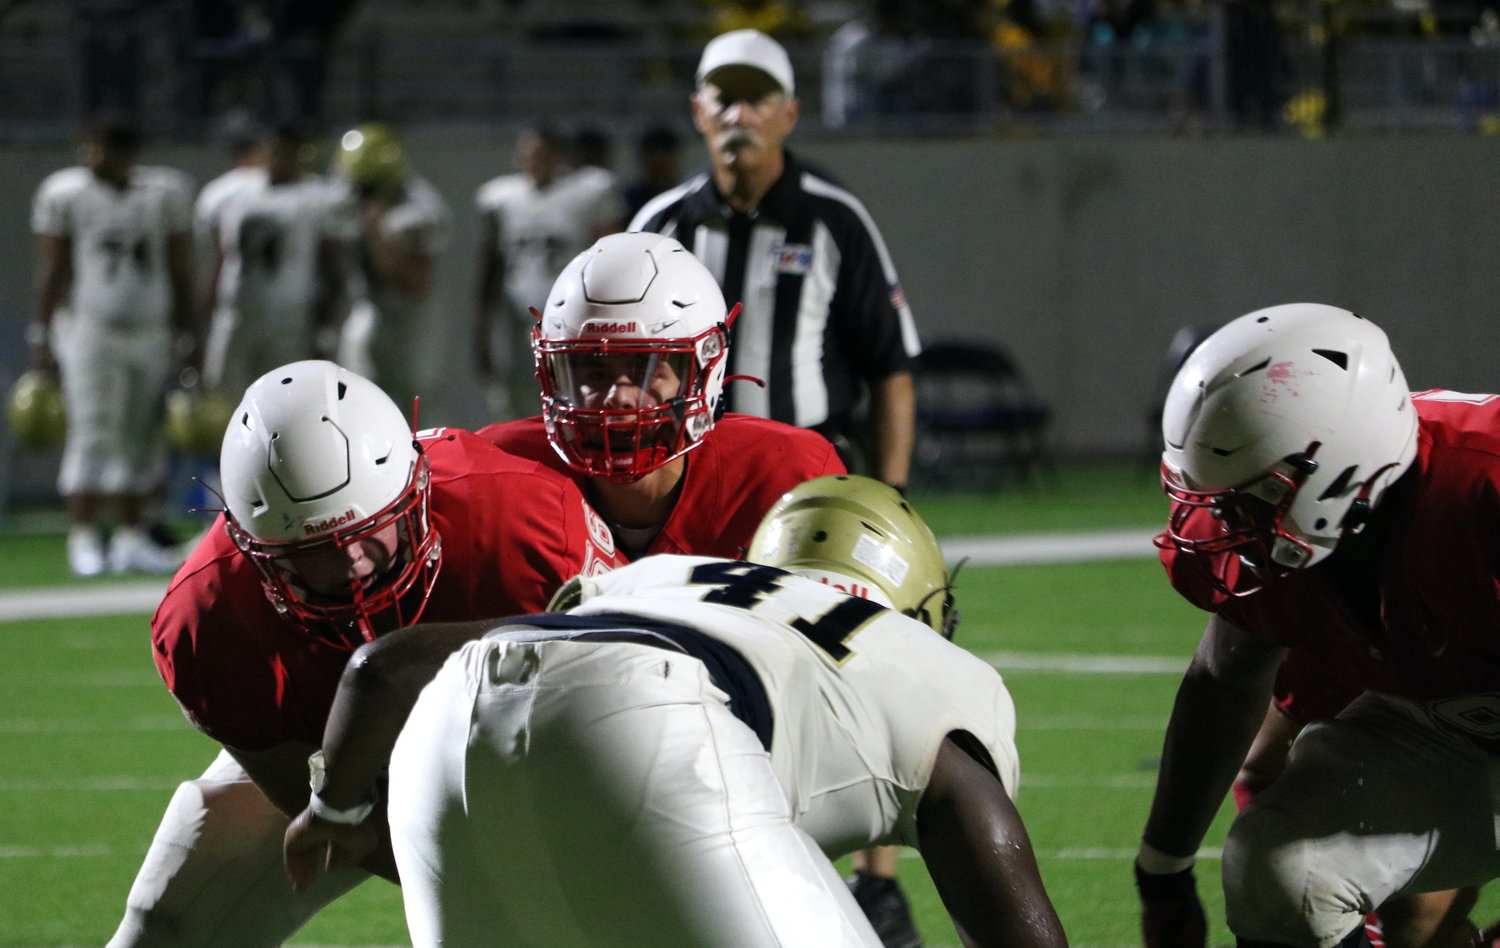 Katy’s Caleb Koger prepares for a snap during Katy’s scrimmage against Klein Collins on Friday at Legacy Stadium.